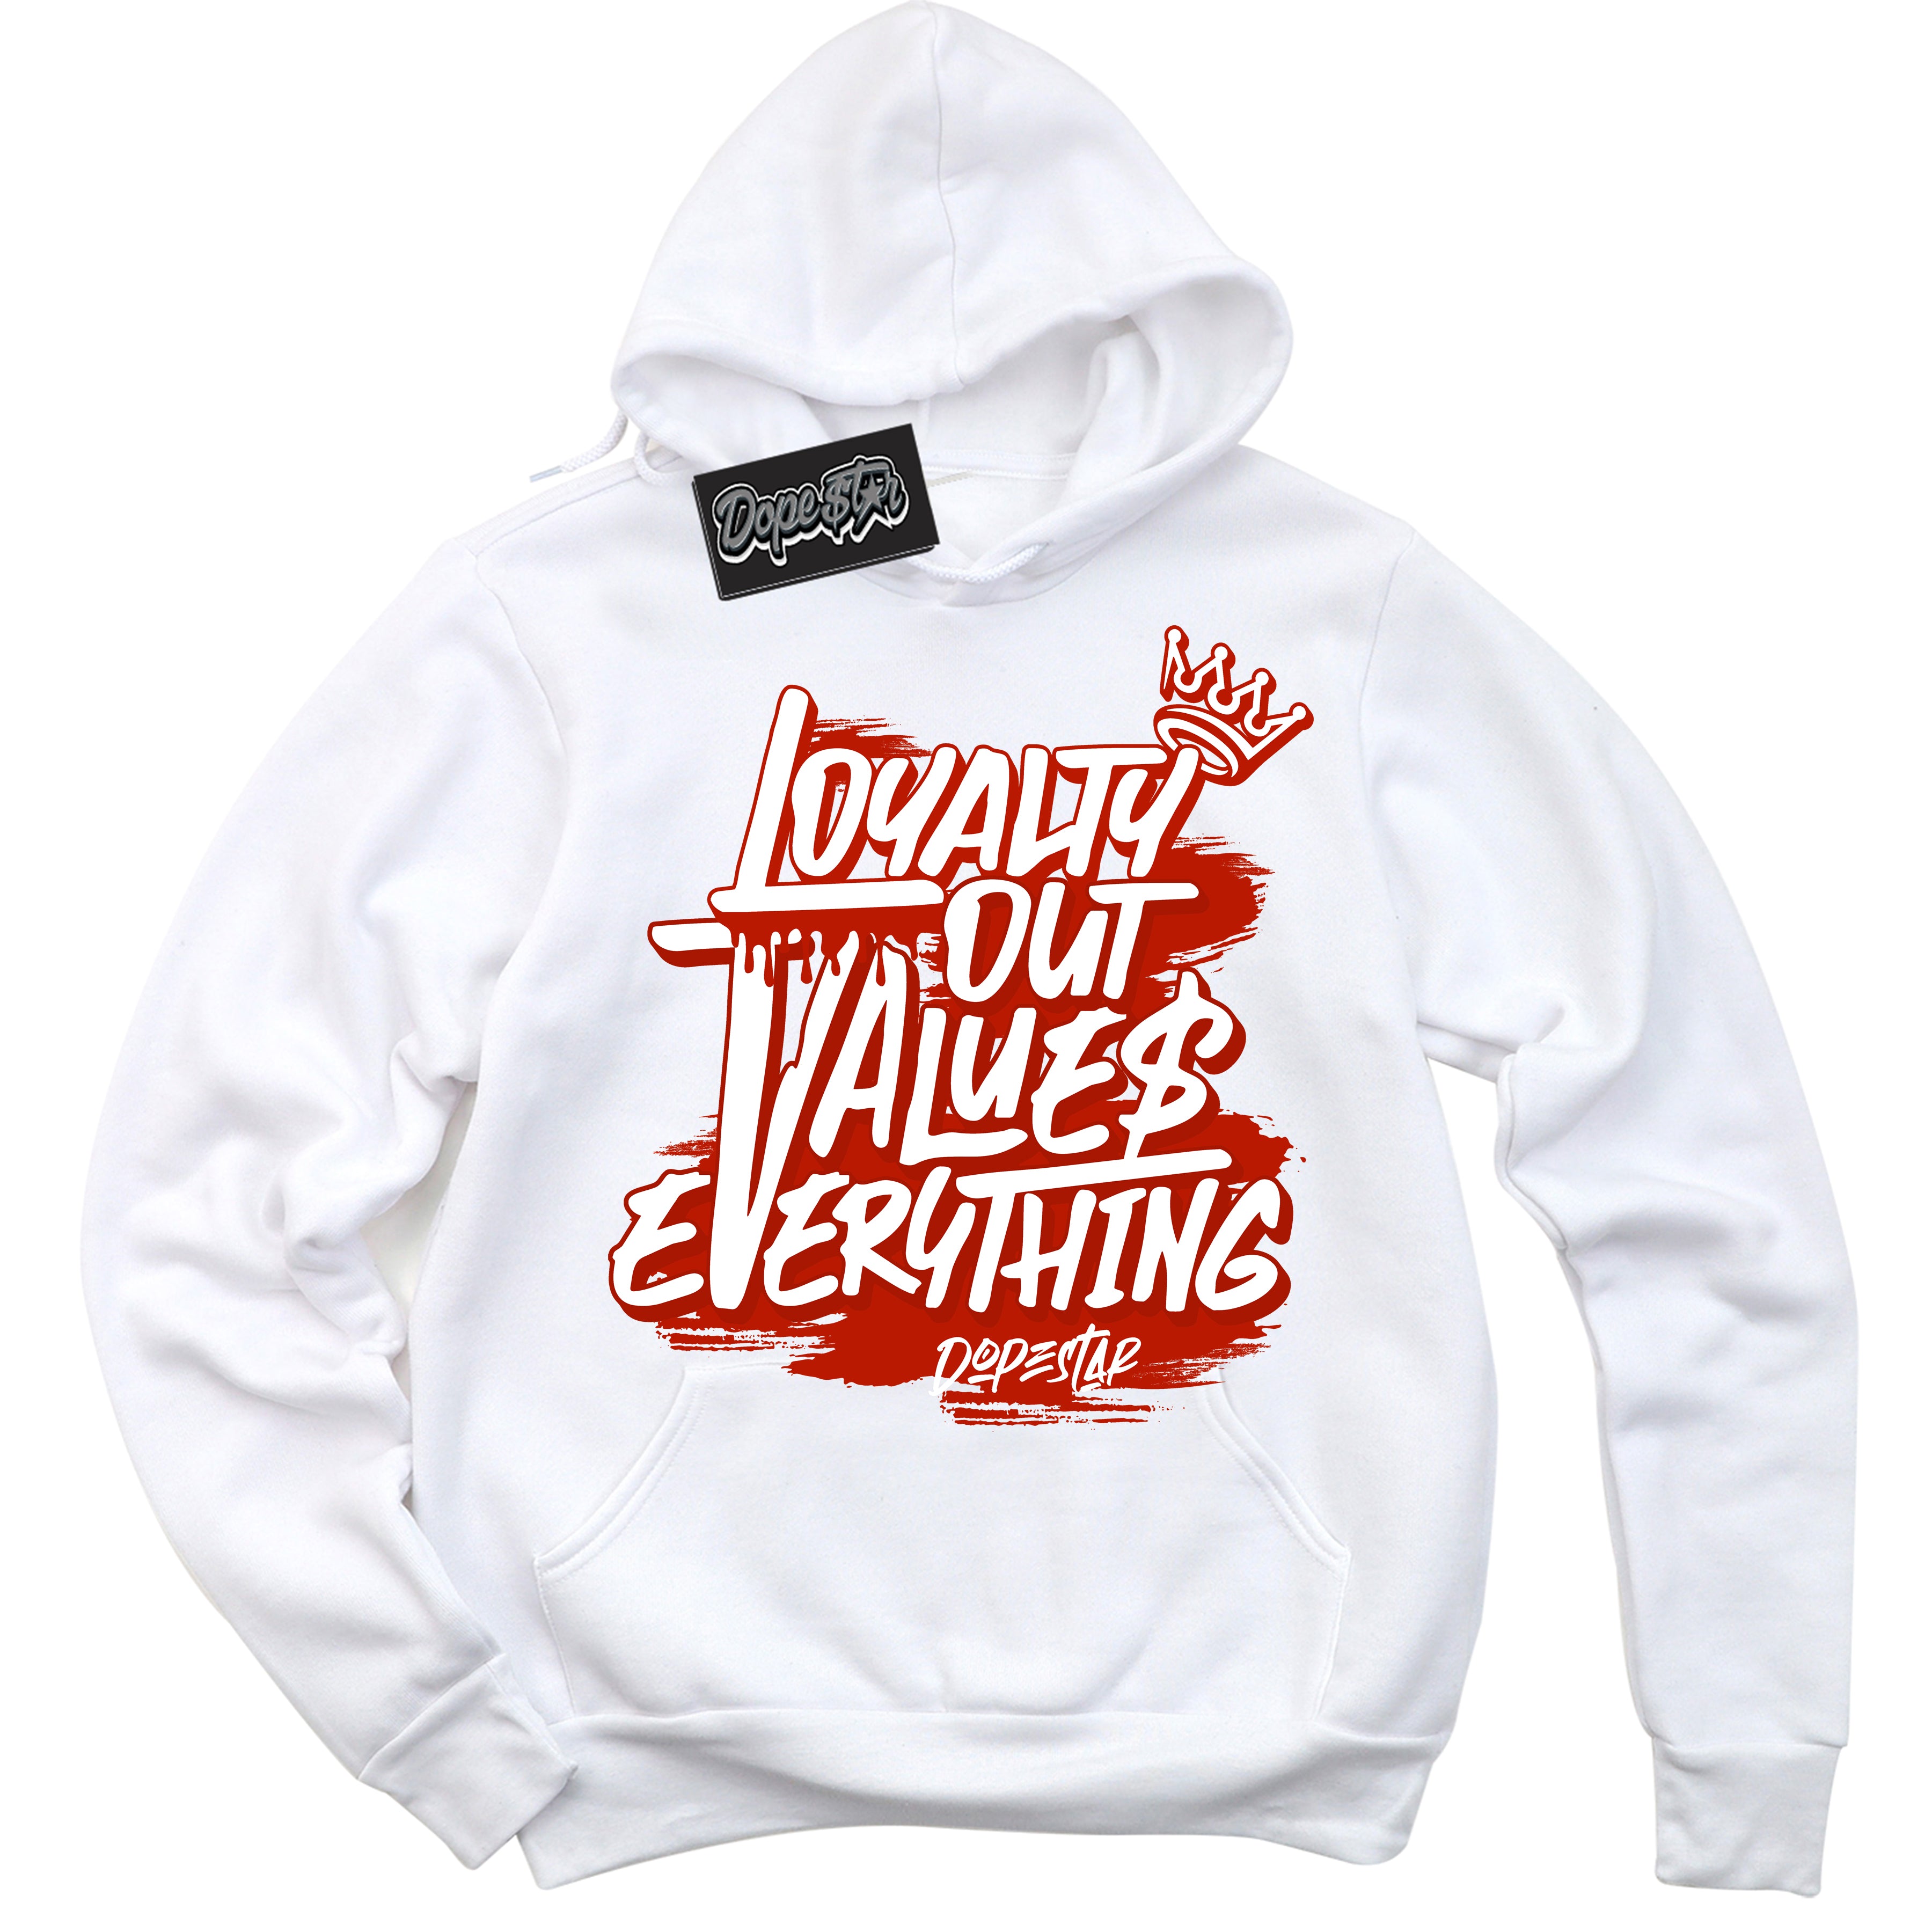 Cool White Hoodie with “ Loyalty Out Values Everything ”  design that Perfectly Matches Cherry 11s Sneakers.